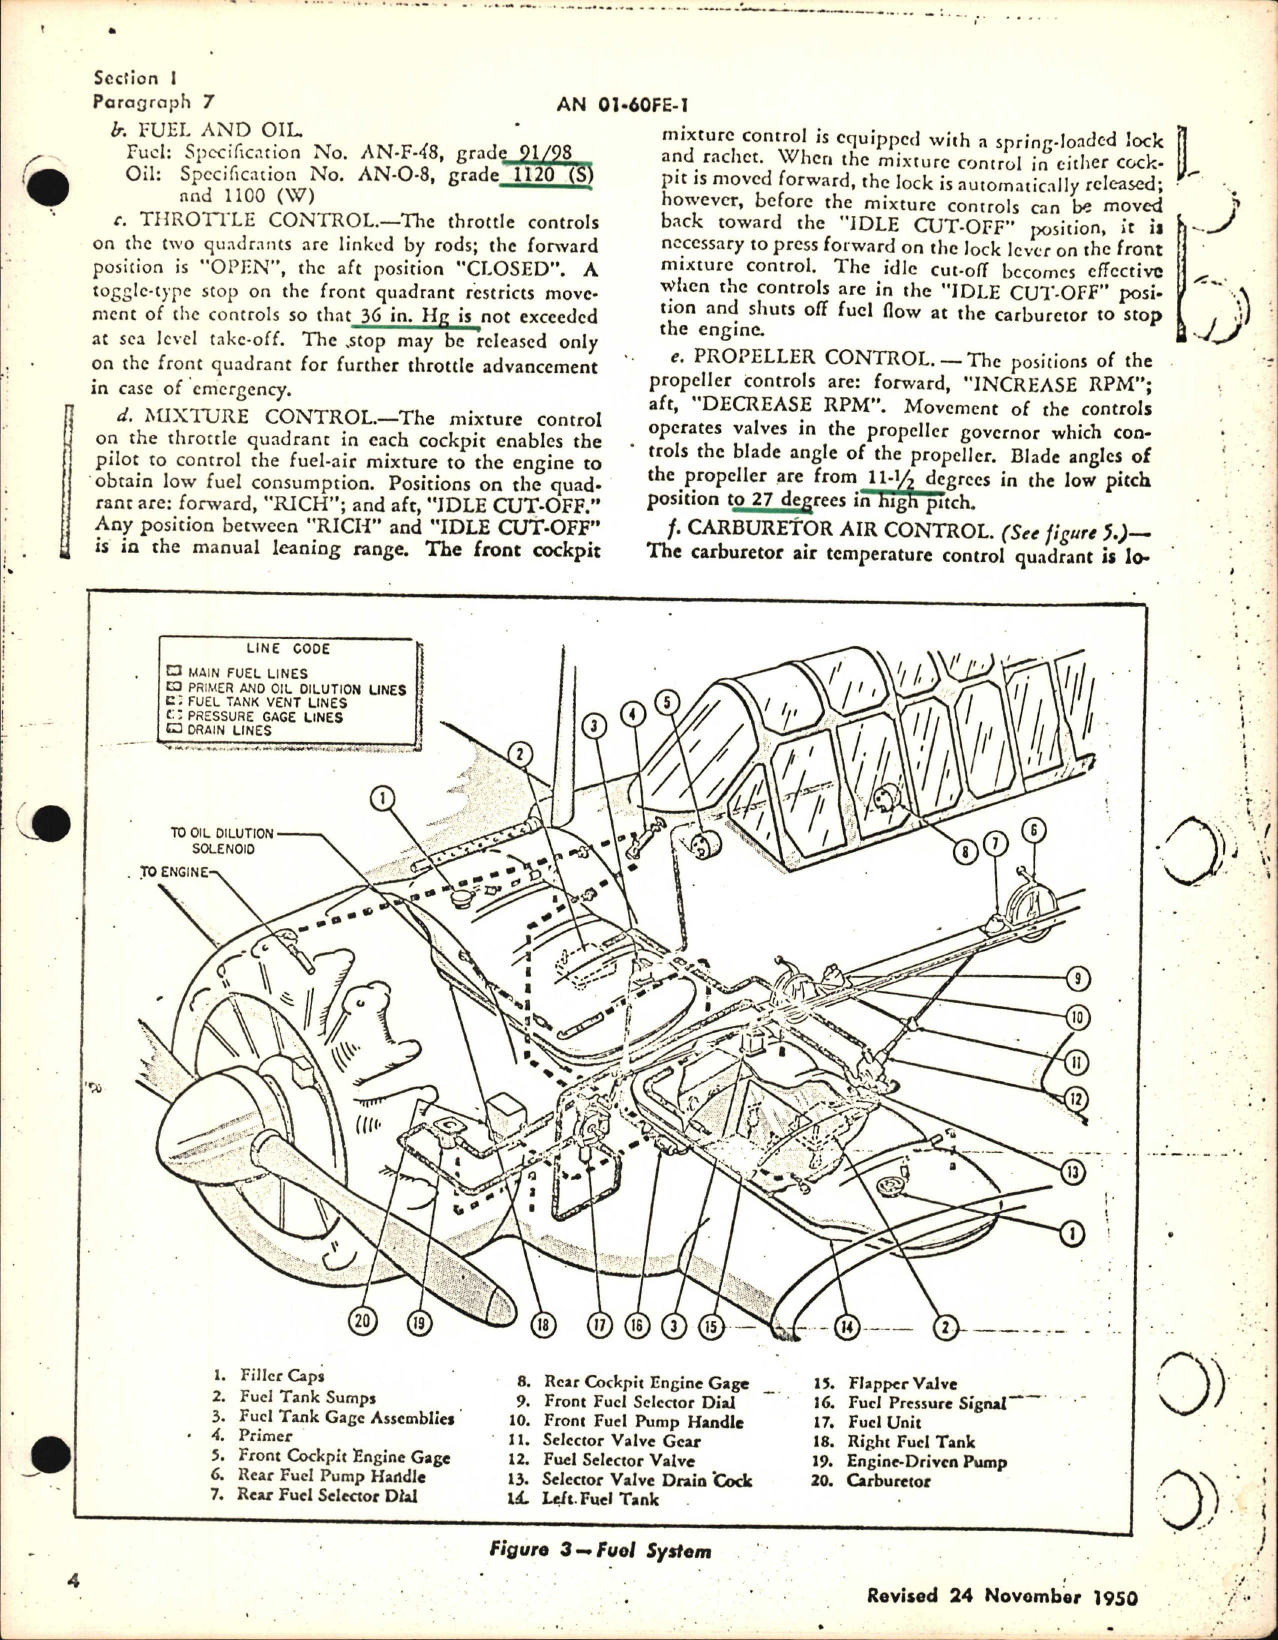 Sample page 6 from AirCorps Library document: Pilot's Flight Operating Instructions for AT-6C